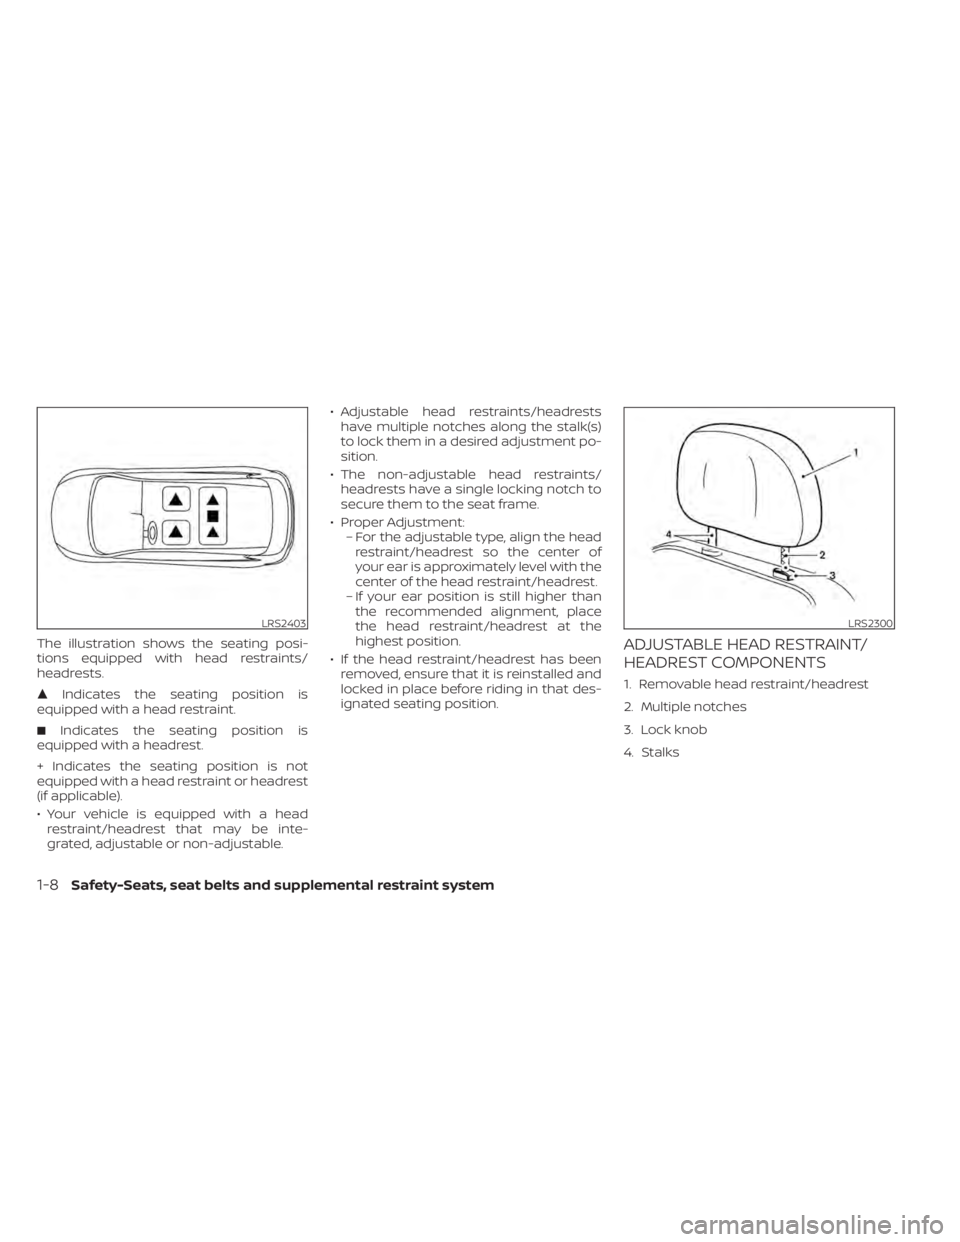 NISSAN SENTRA 2020  Owner´s Manual The illustration shows the seating posi-
tions equipped with head restraints/
headrests.
Indicates the seating position is
equipped with a head restraint.
 Indicates the seating position is
equipped